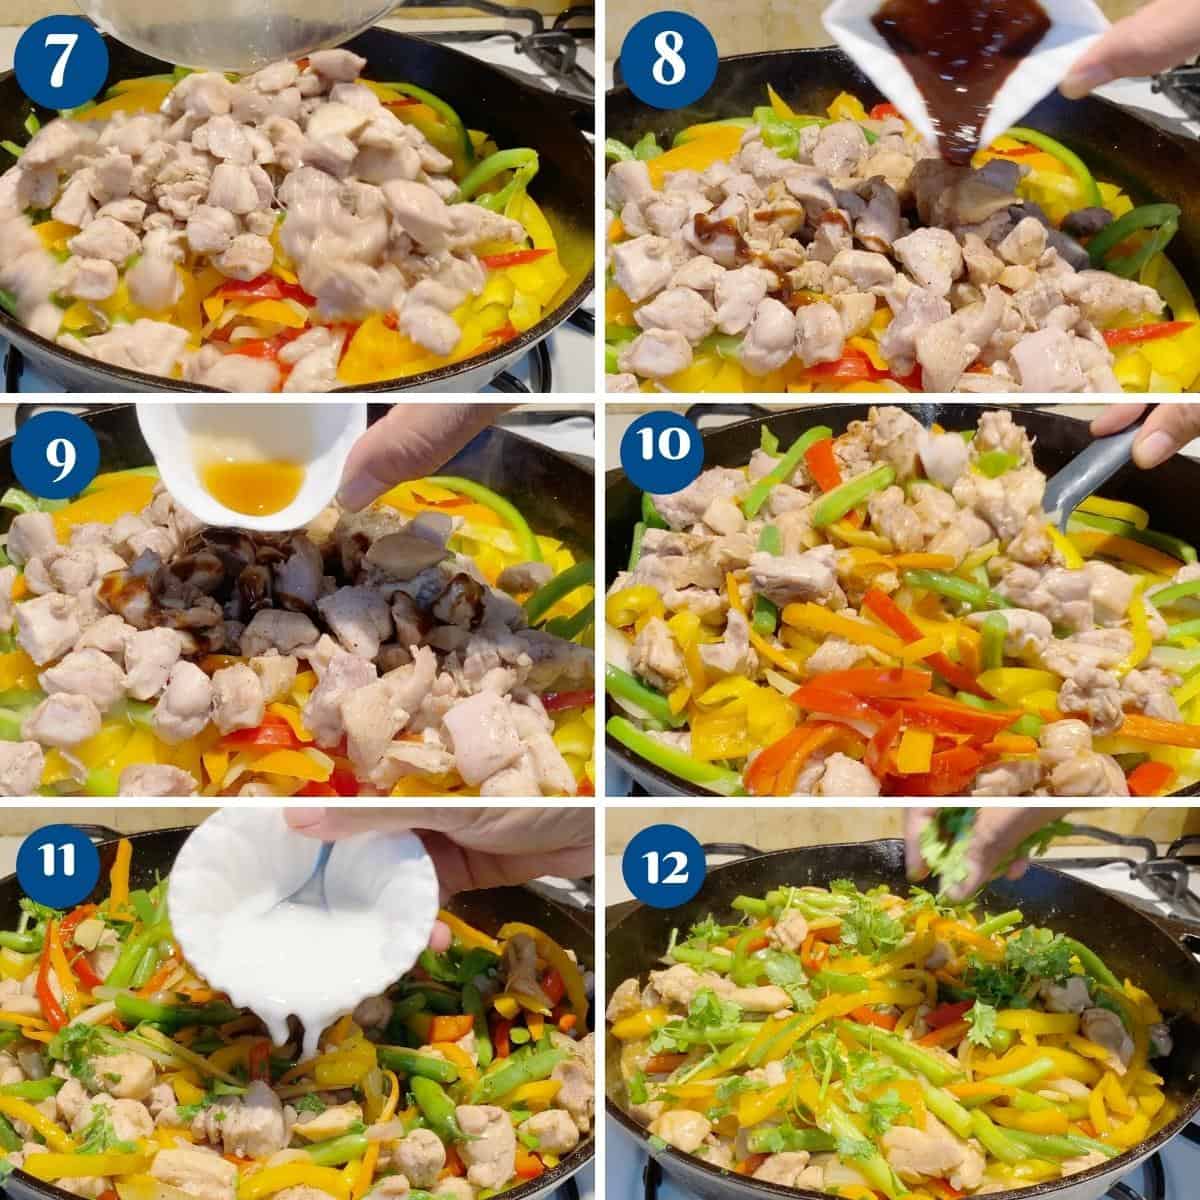 Progress Pictures A large skillet with chicken, veggies and stir fry sauces.